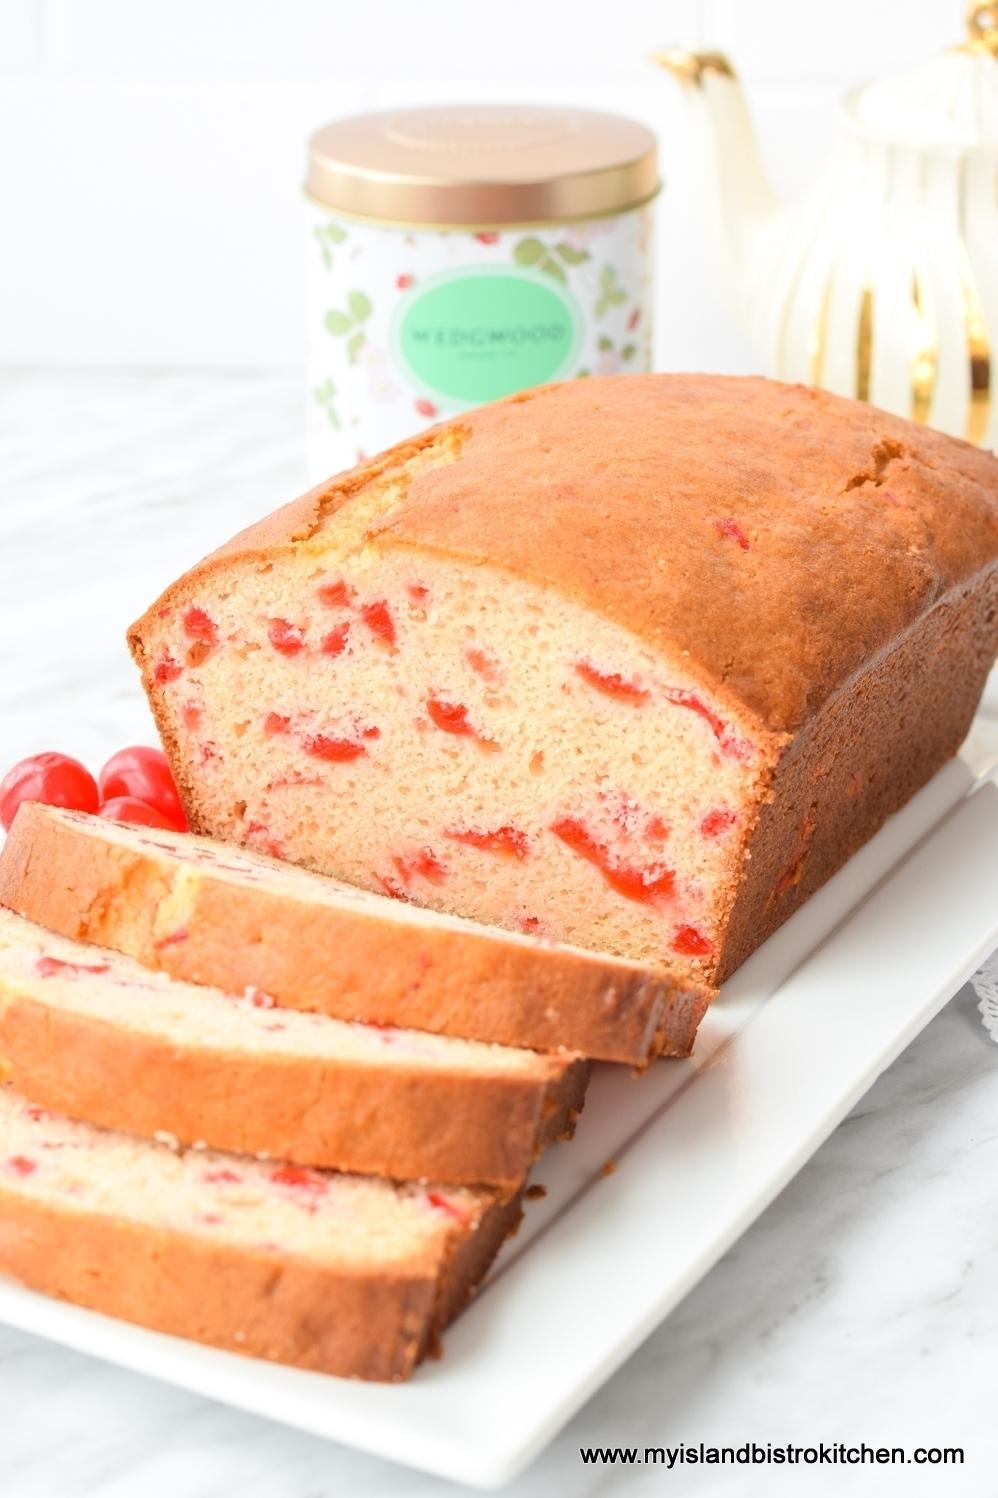  Get ready to indulge in the perfect cherry pound cake